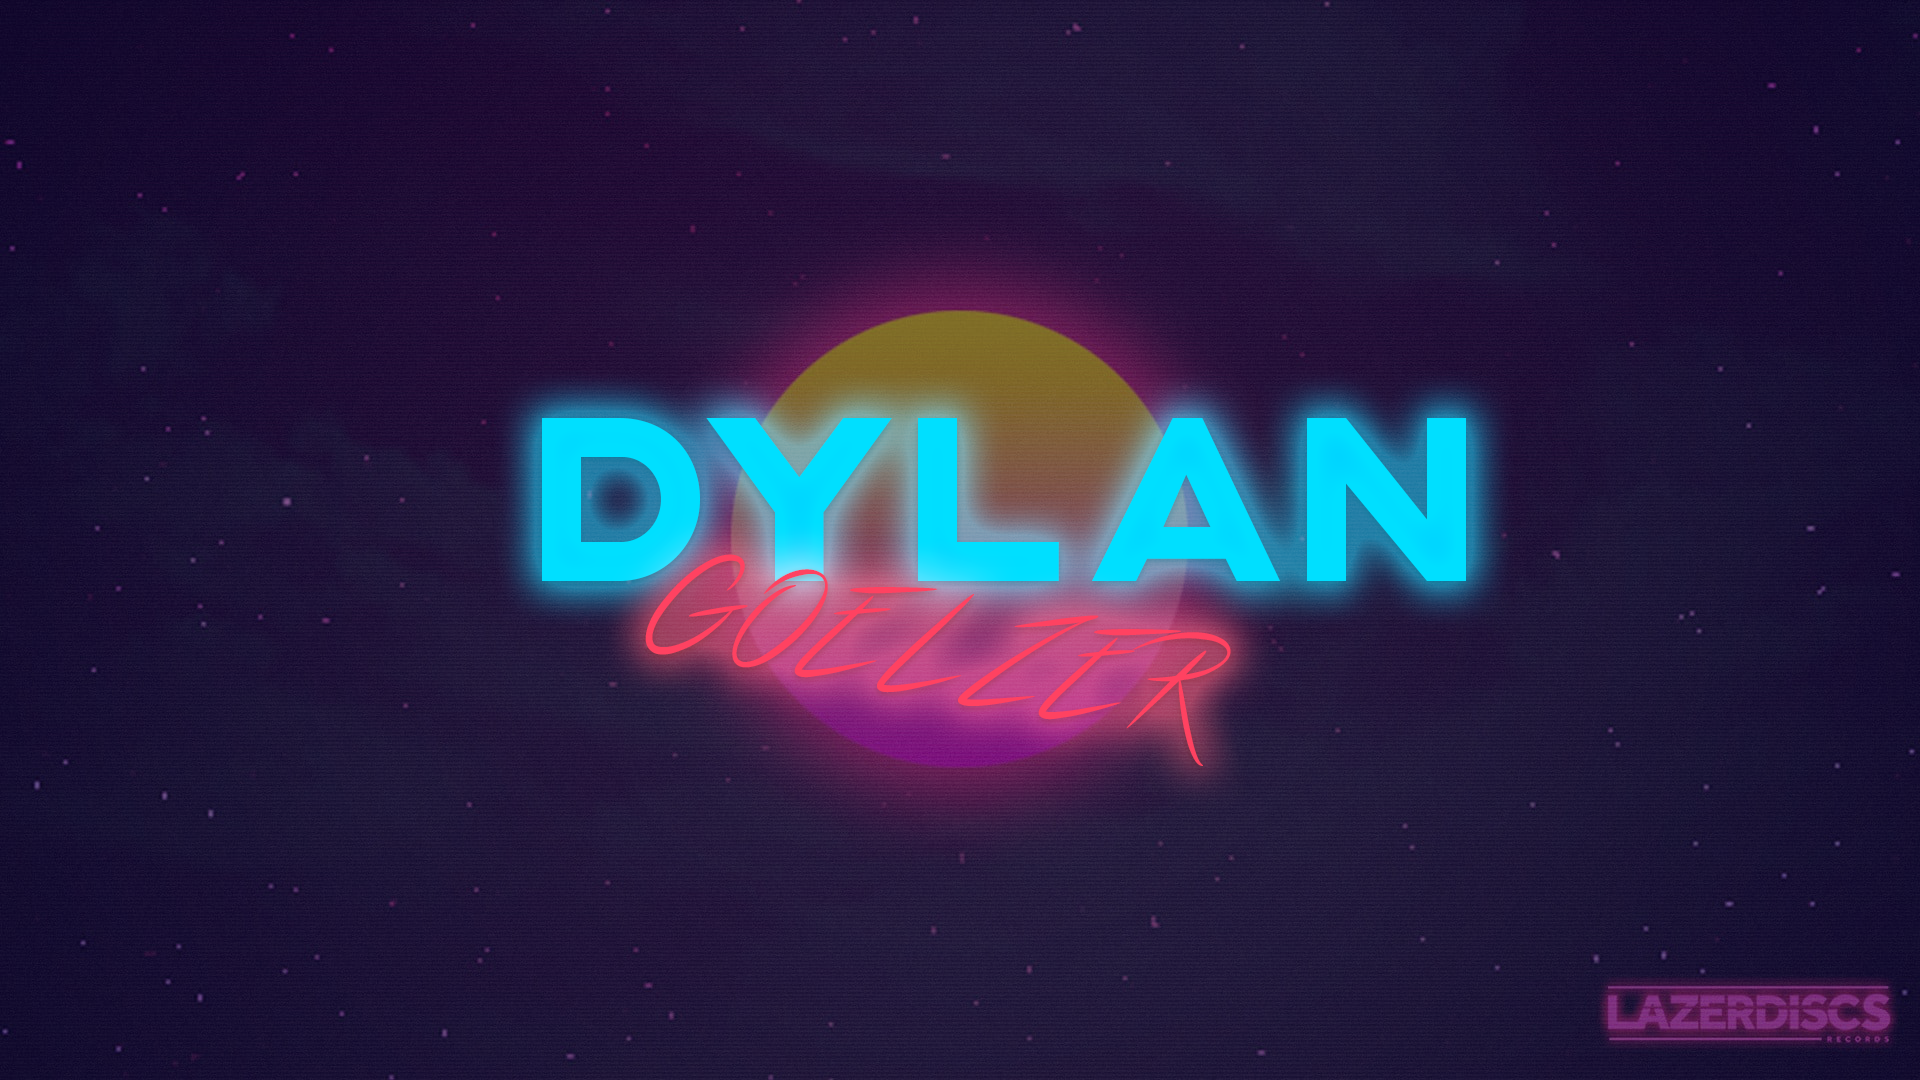 Steam Workshop My Mod Pack - dylanthehyper roblox password how to get free unlimited